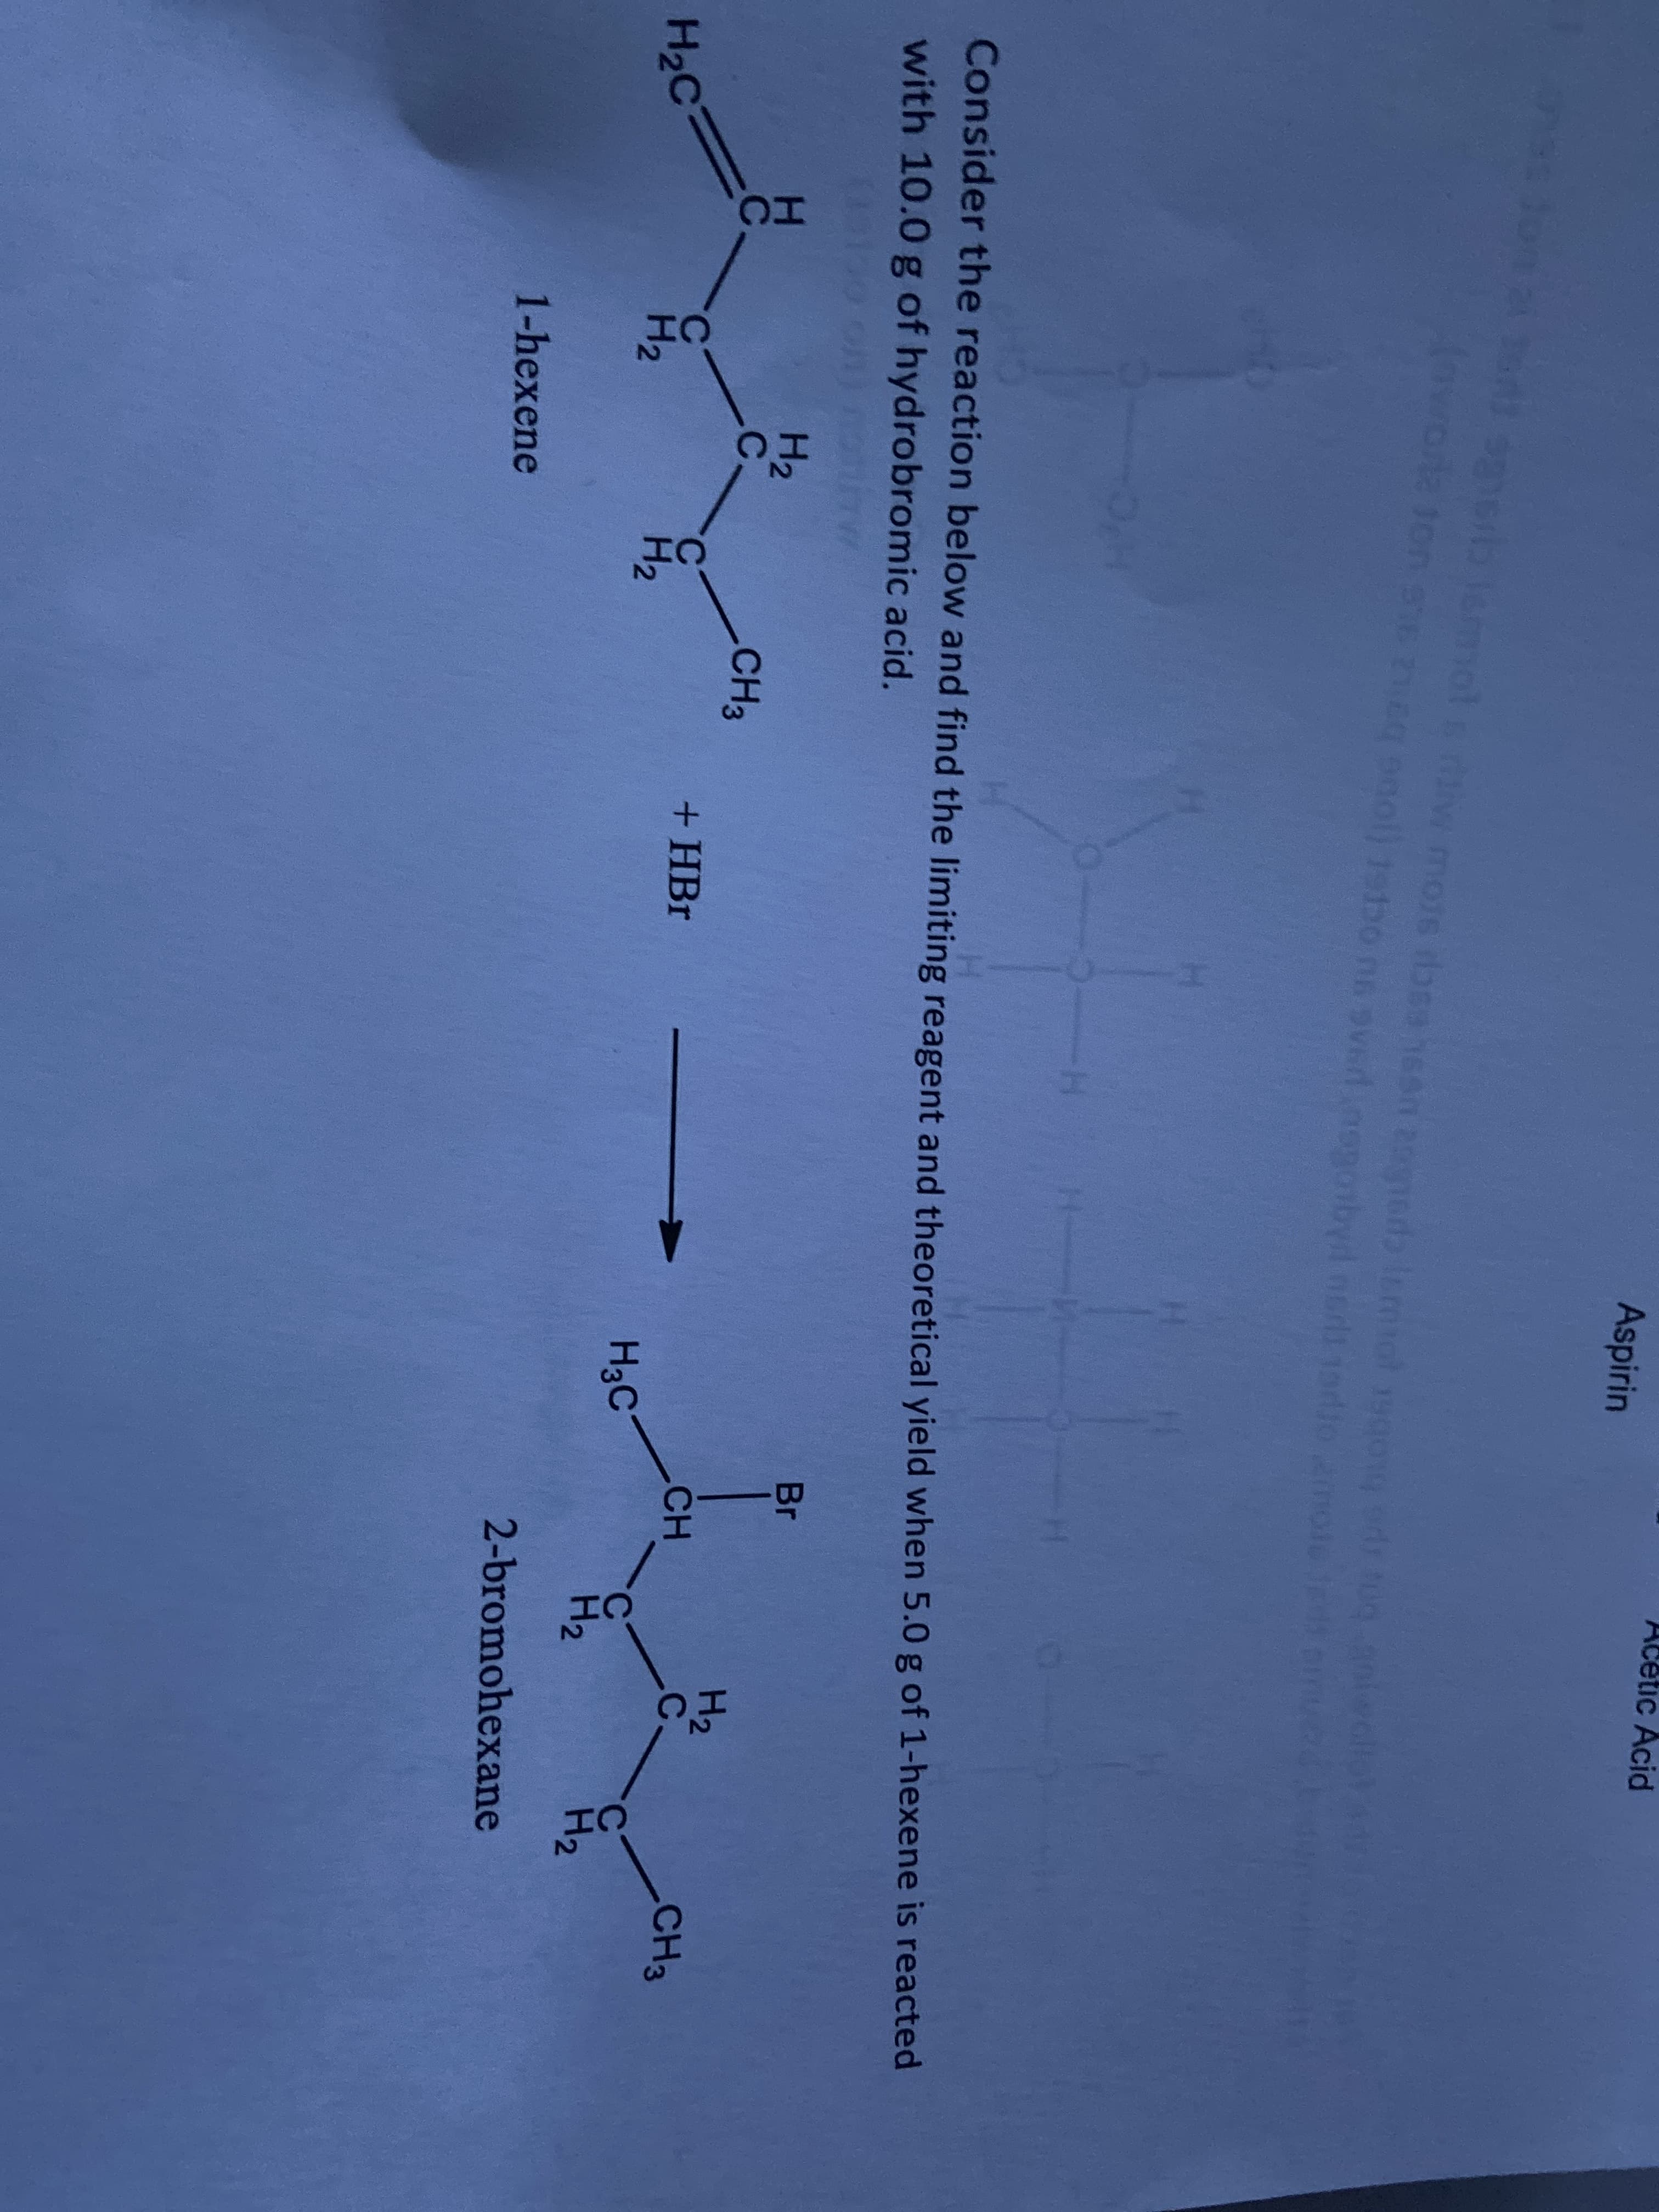 cetic Acid
Aspirin
1on se 0
ag nol) 1stbo nn sved nenonbyil nedt 1adio 2mole e in
Consider the reaction below and find the limiting reagent and theoretical yield when 5.0 g of 1-hexene is reacted
with 10.0 g of hydrobromic acid.
Br
H2
.C.
H2
.C.
CH3
CH
CH3
+HBr
%3D
H2C
C.
H2
H3C
H2
H2
H2
2-bromohexane
1-hexene
